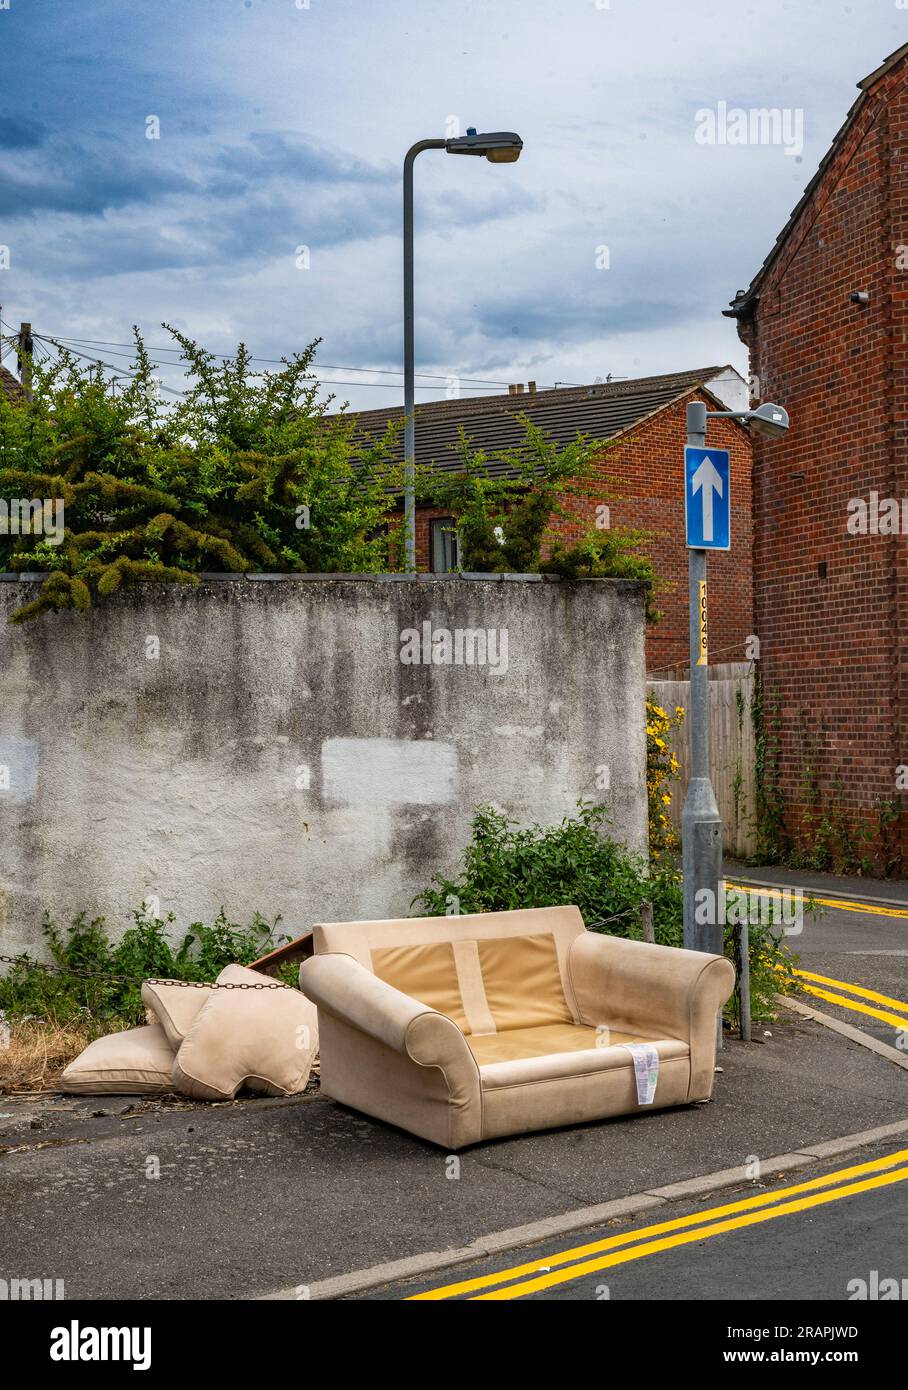 Fly Tipping – Furniture dumped and fly tipped on the corner of a street in a residential area of town Stock Photo